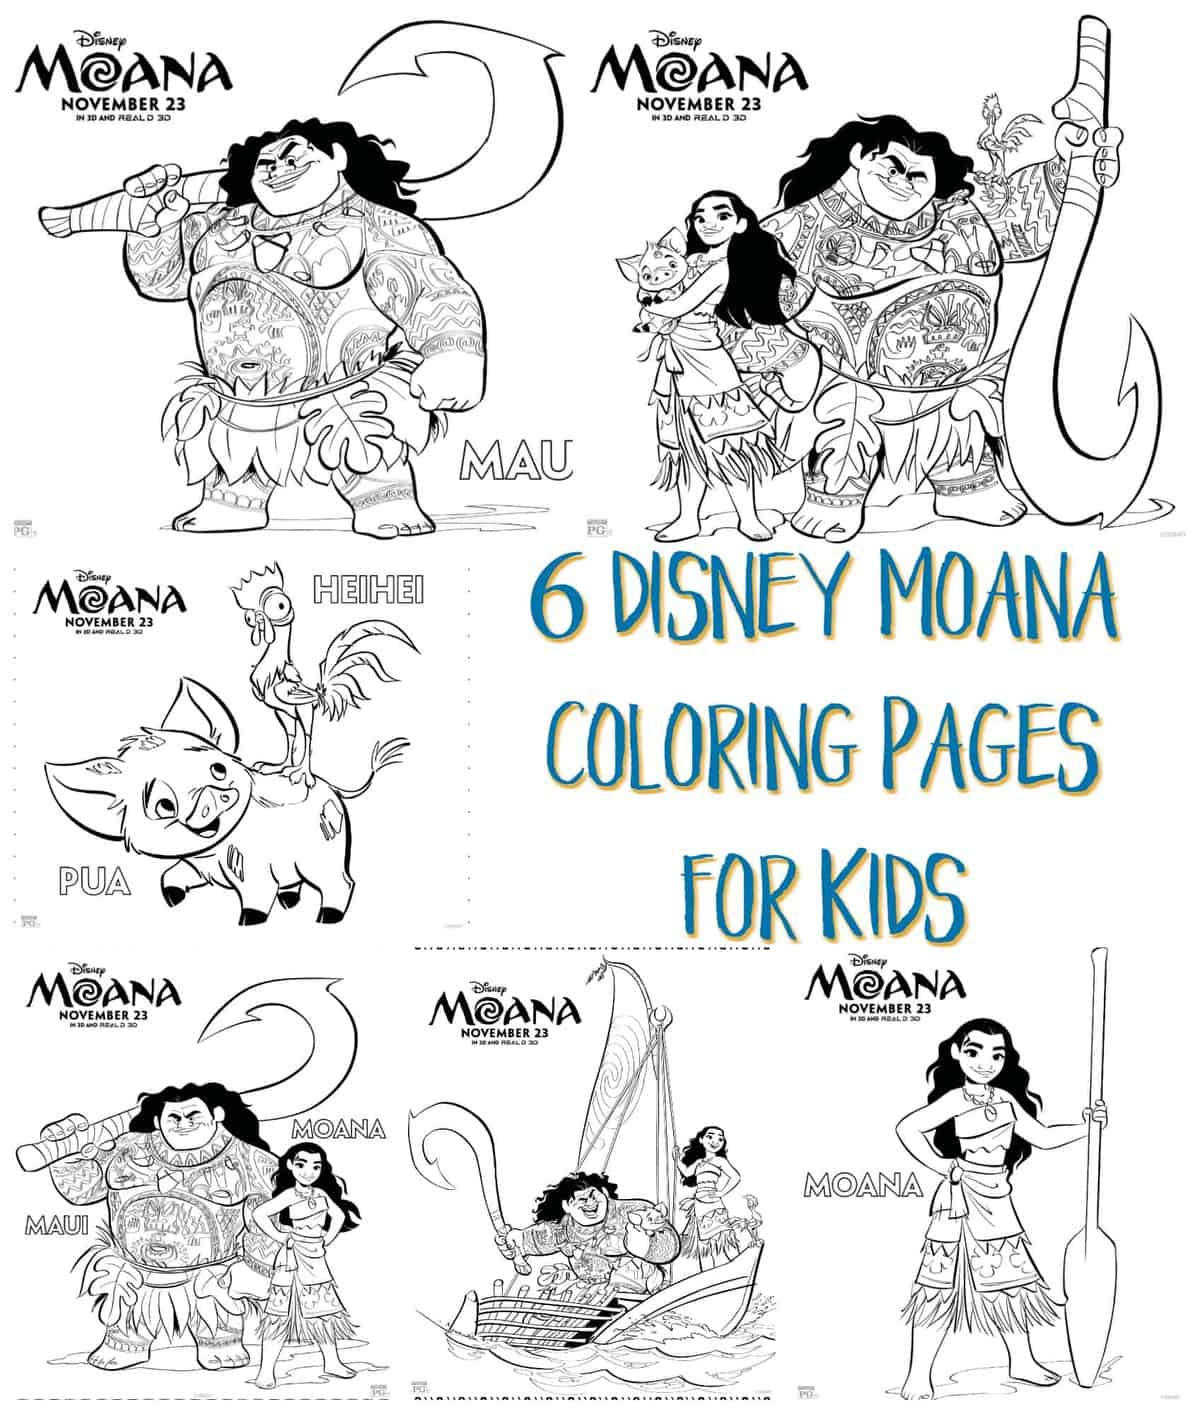 Disney moana coloring pages for kids